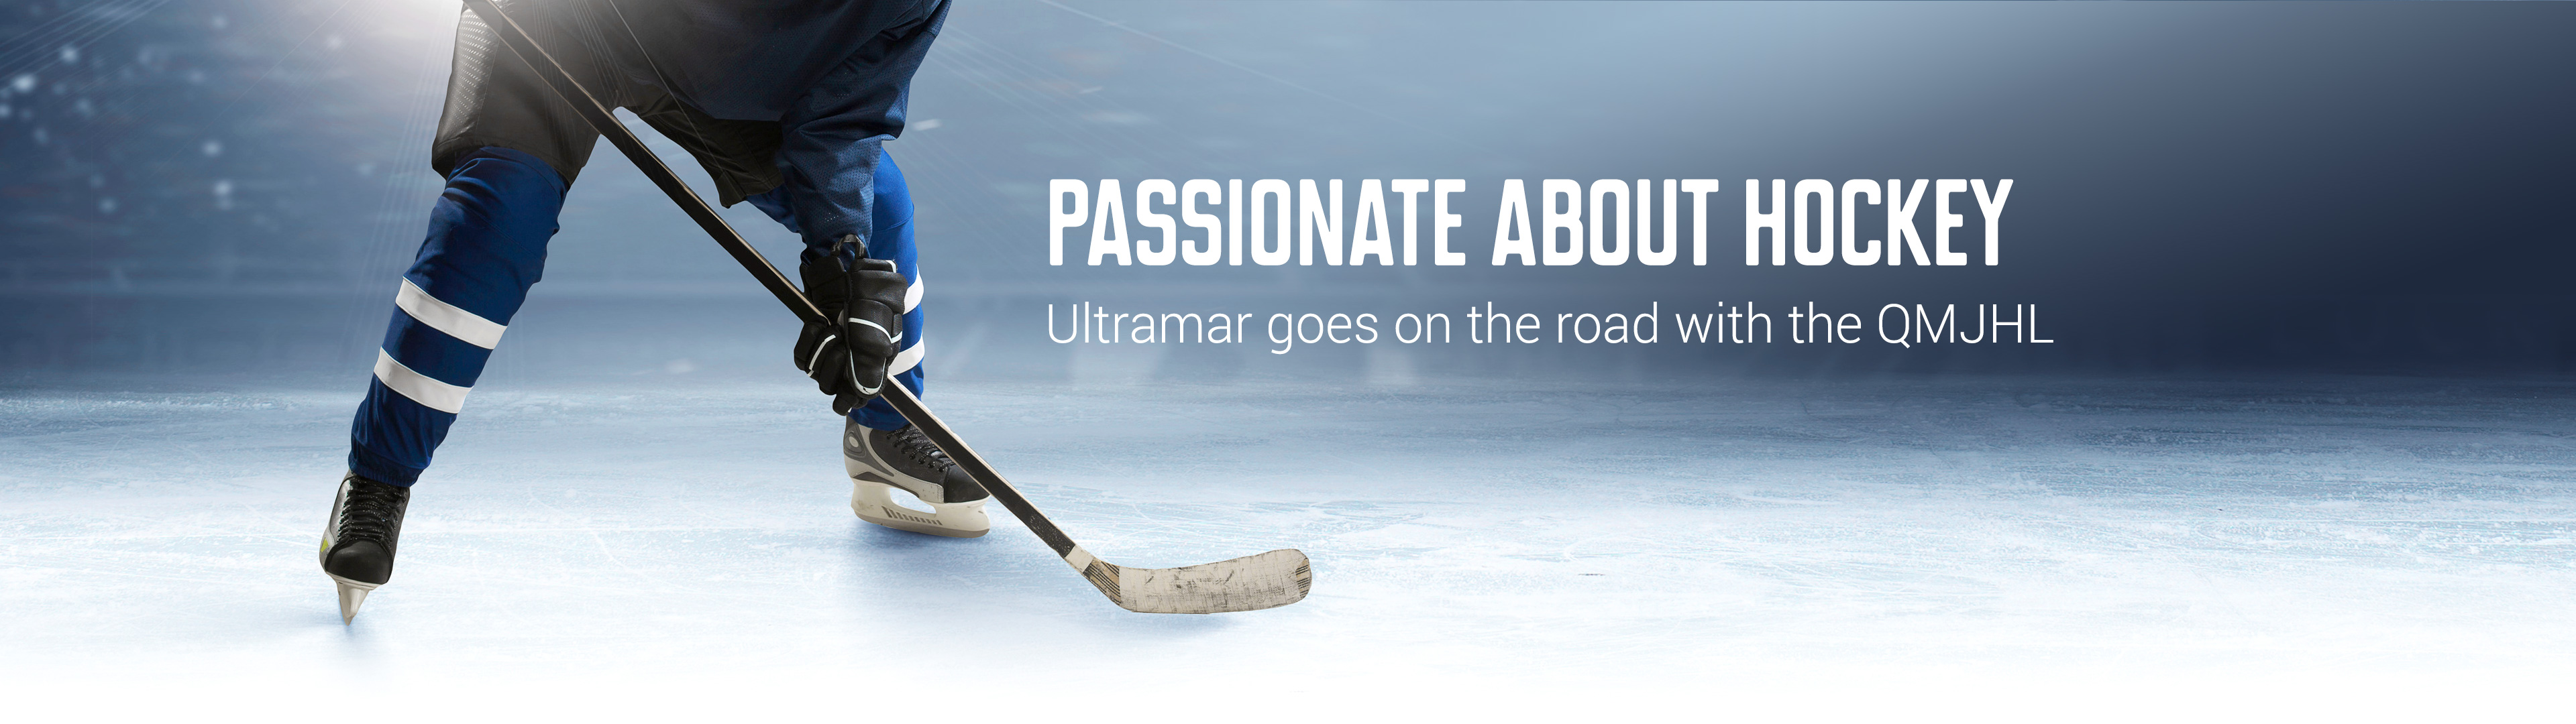 Passionnate about hockey - Ultramar goes on the roead with the QMJHL